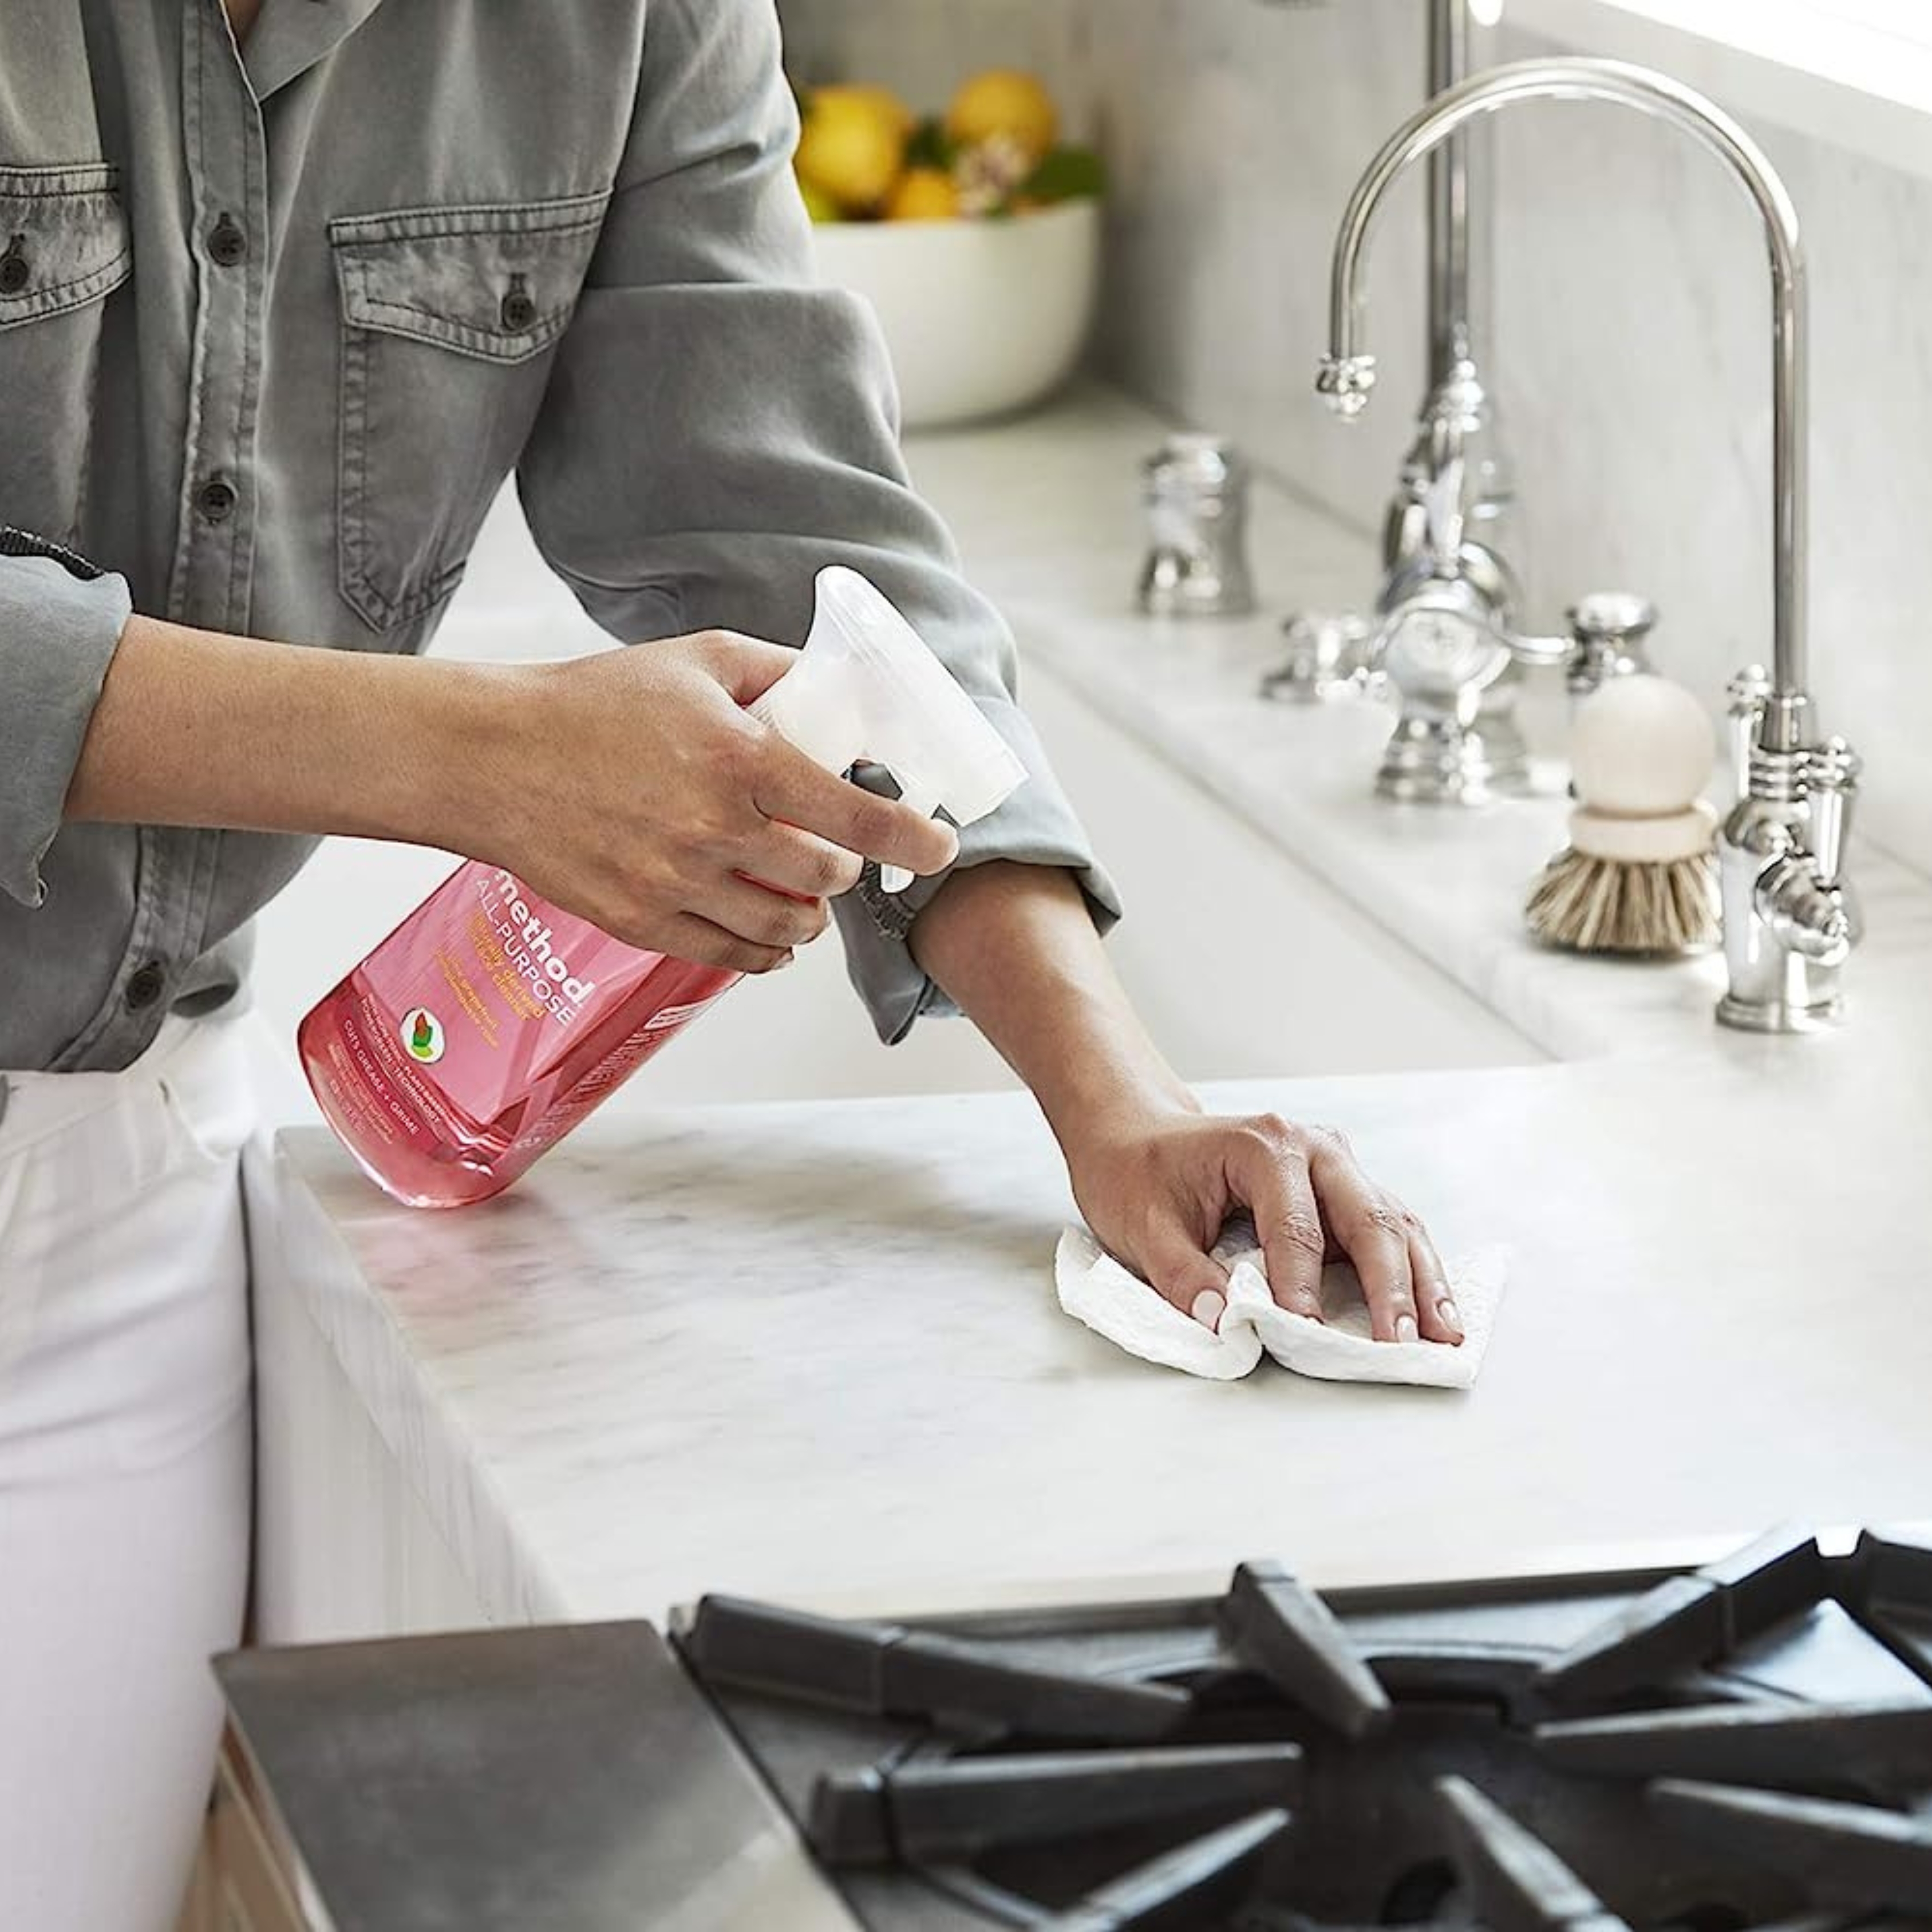 10 Cleaning Essentials For Anyone Whose New Year's Resolution Is